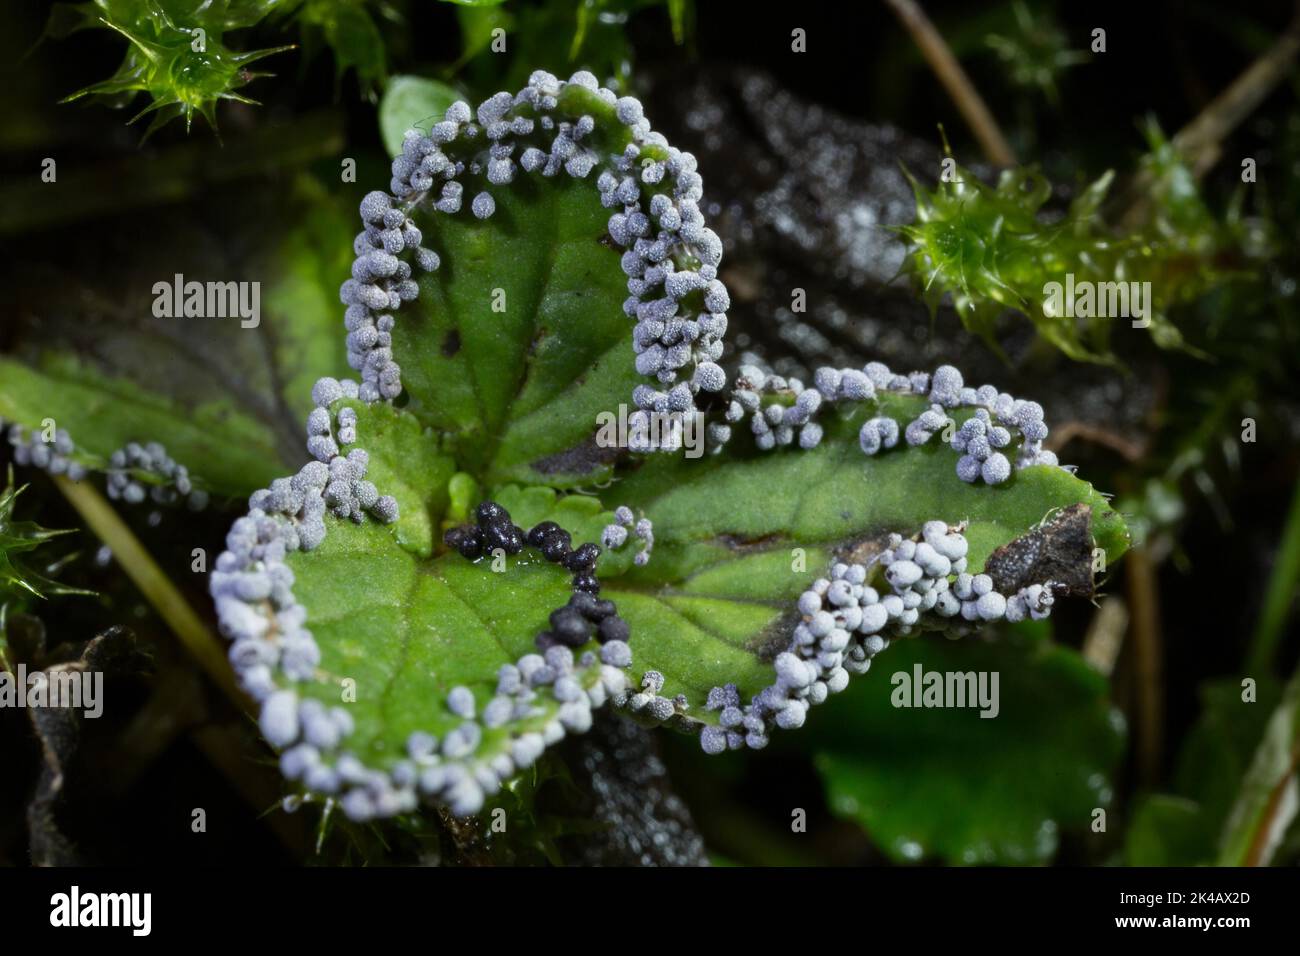 Slime mould Physarum leucopus many lime-pollinated fruiting bodies on green leaves Stock Photo